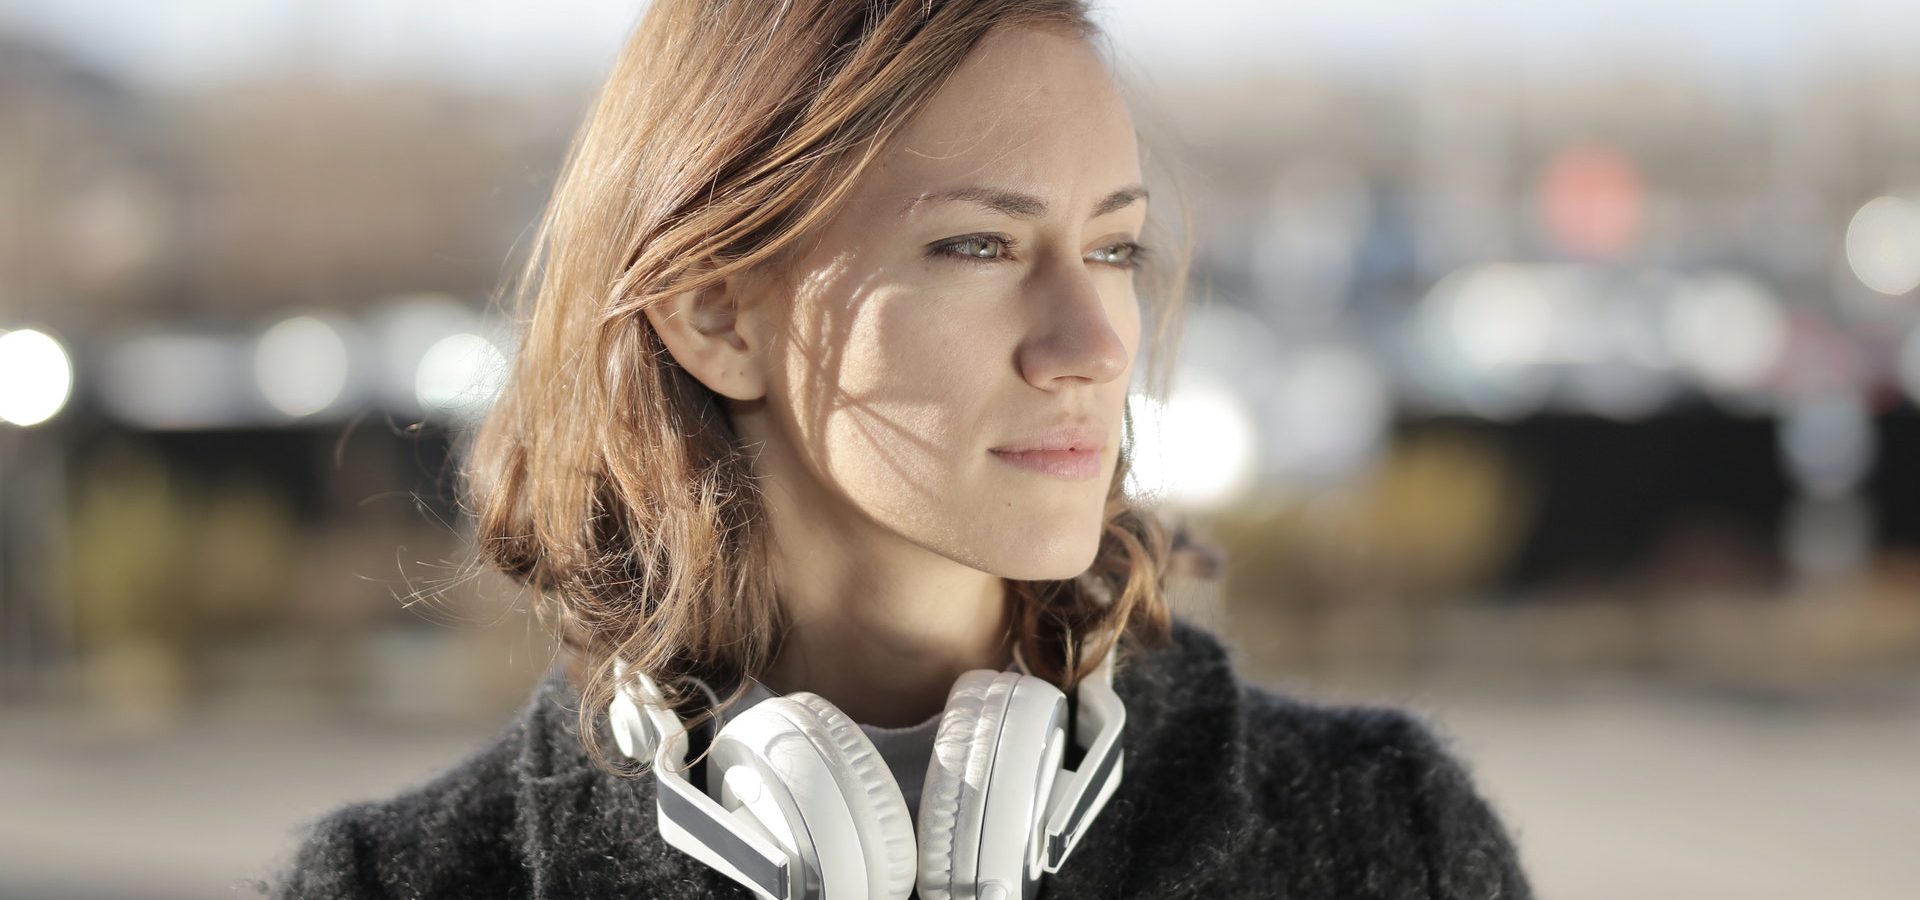 Woman with headphones around her neck outside